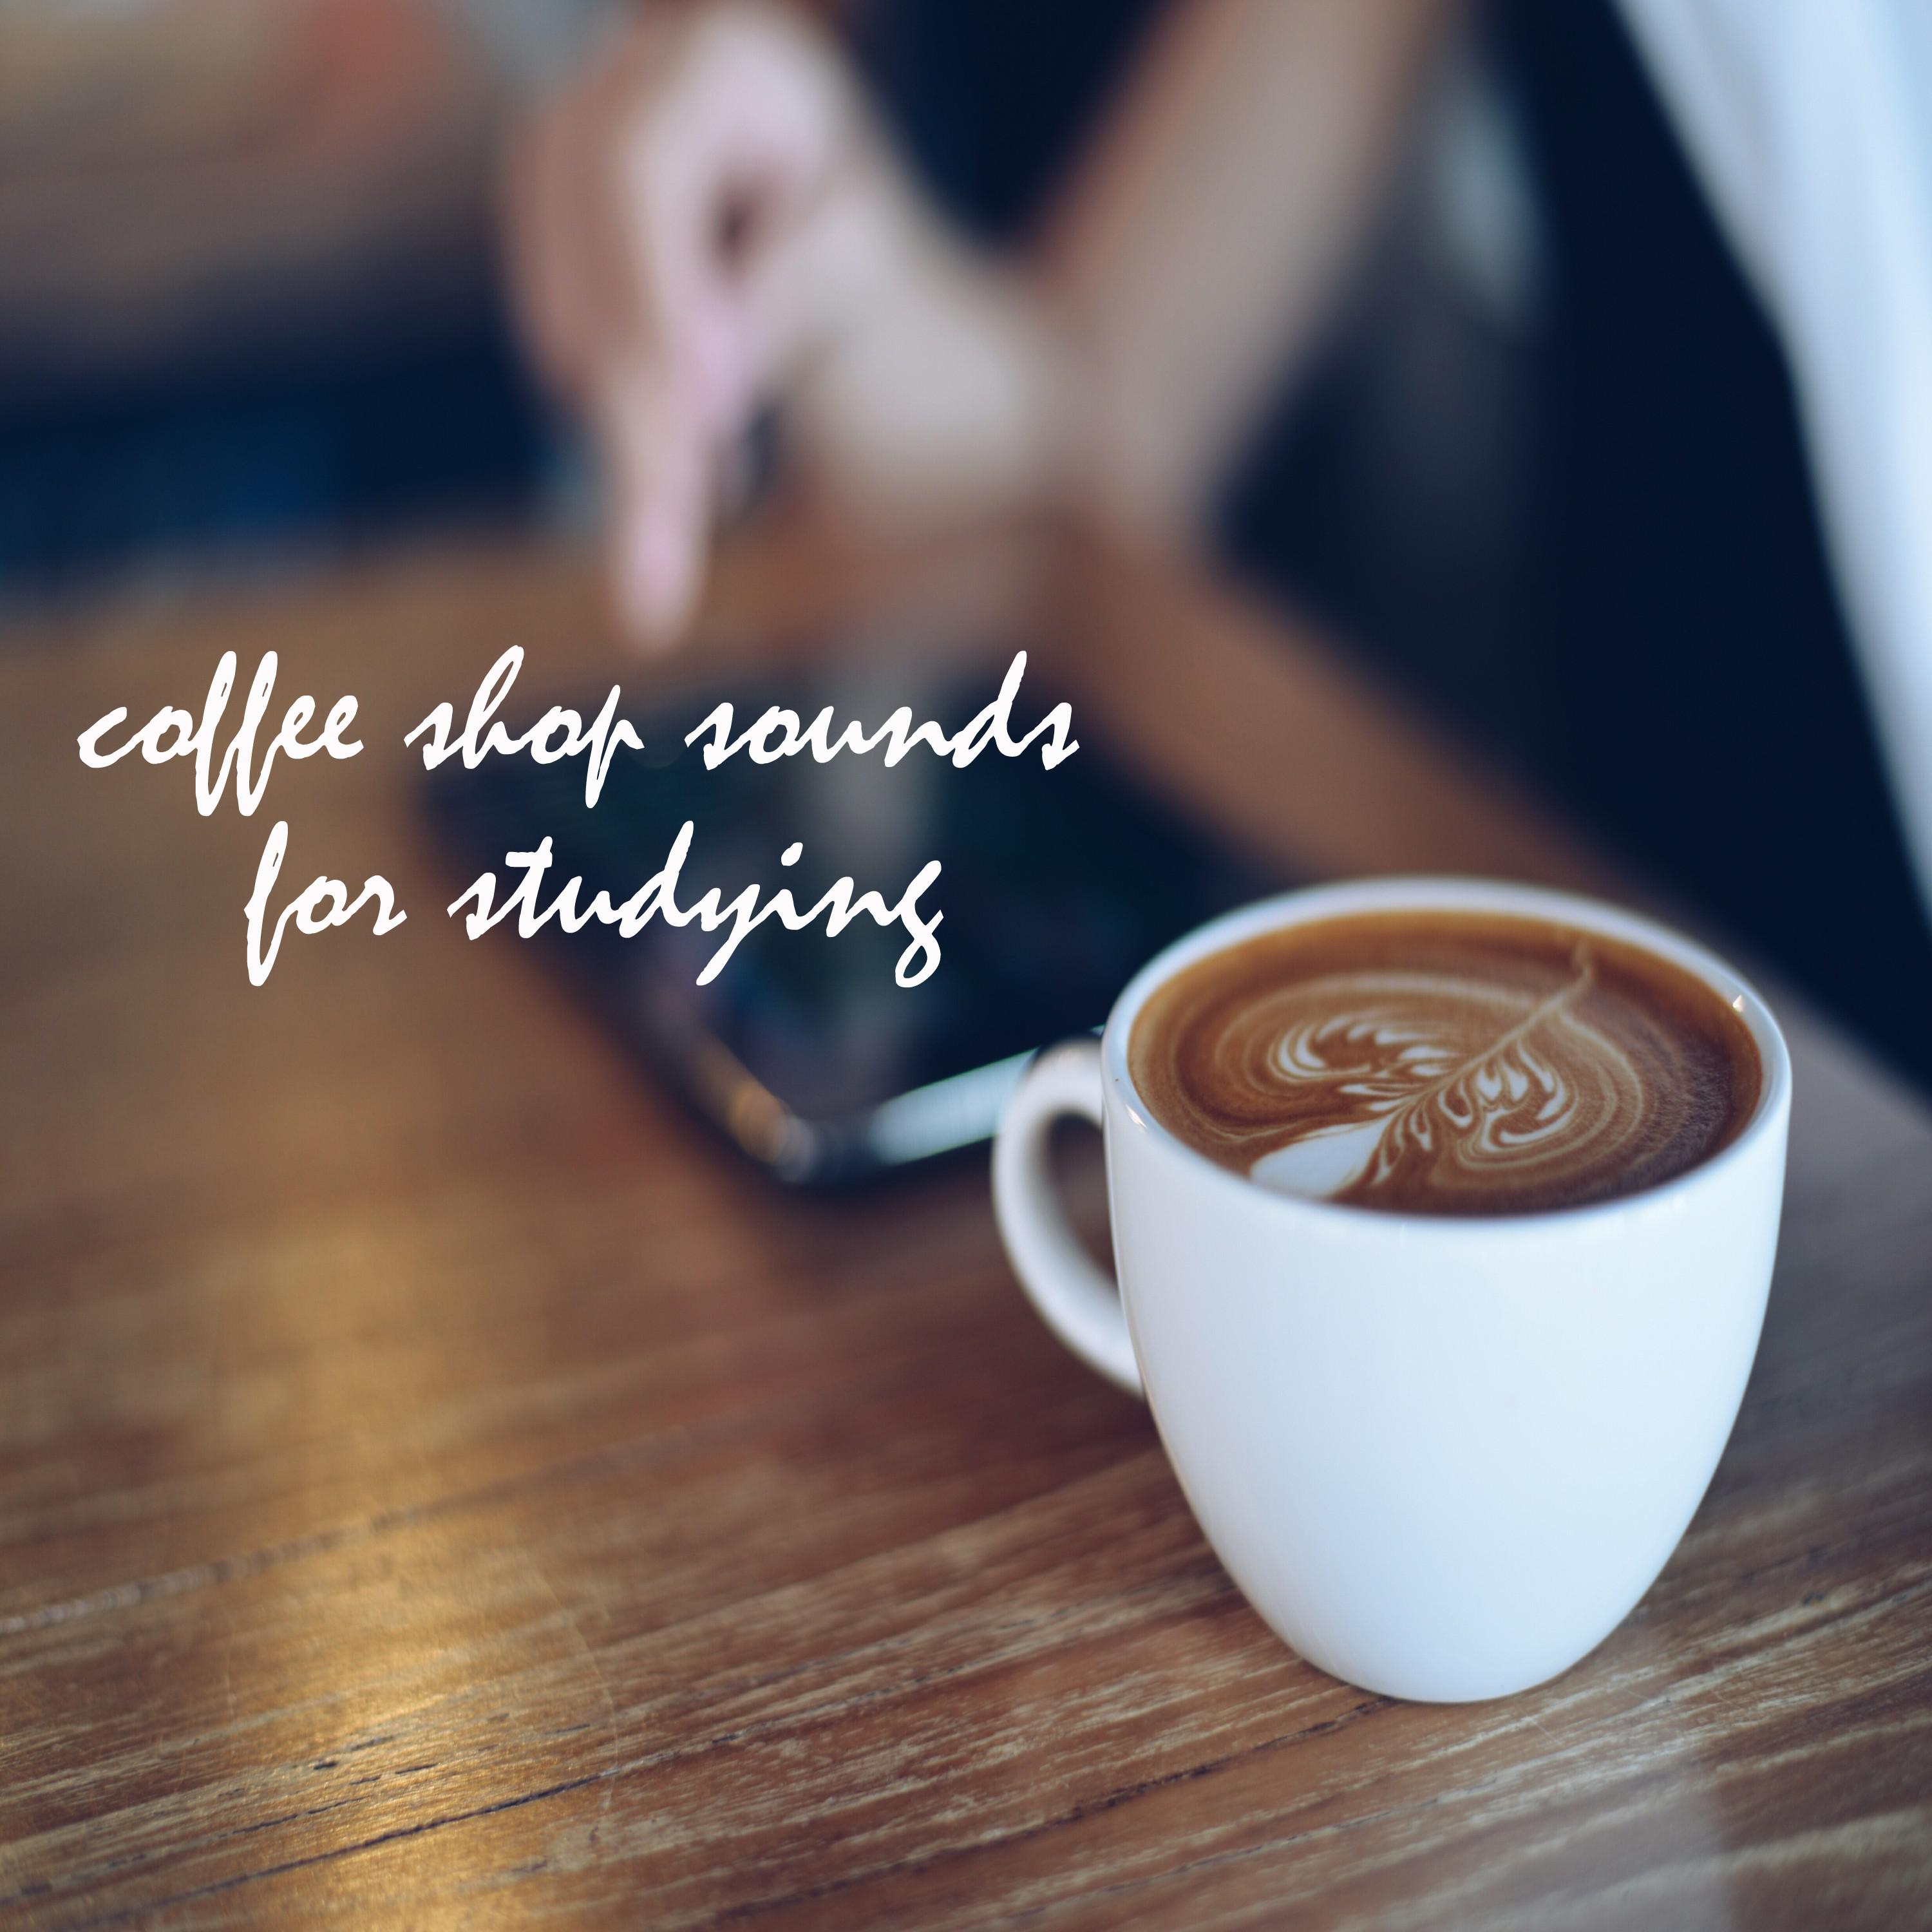 Coffee Shop Sounds for Studying and Working, Pt. 33